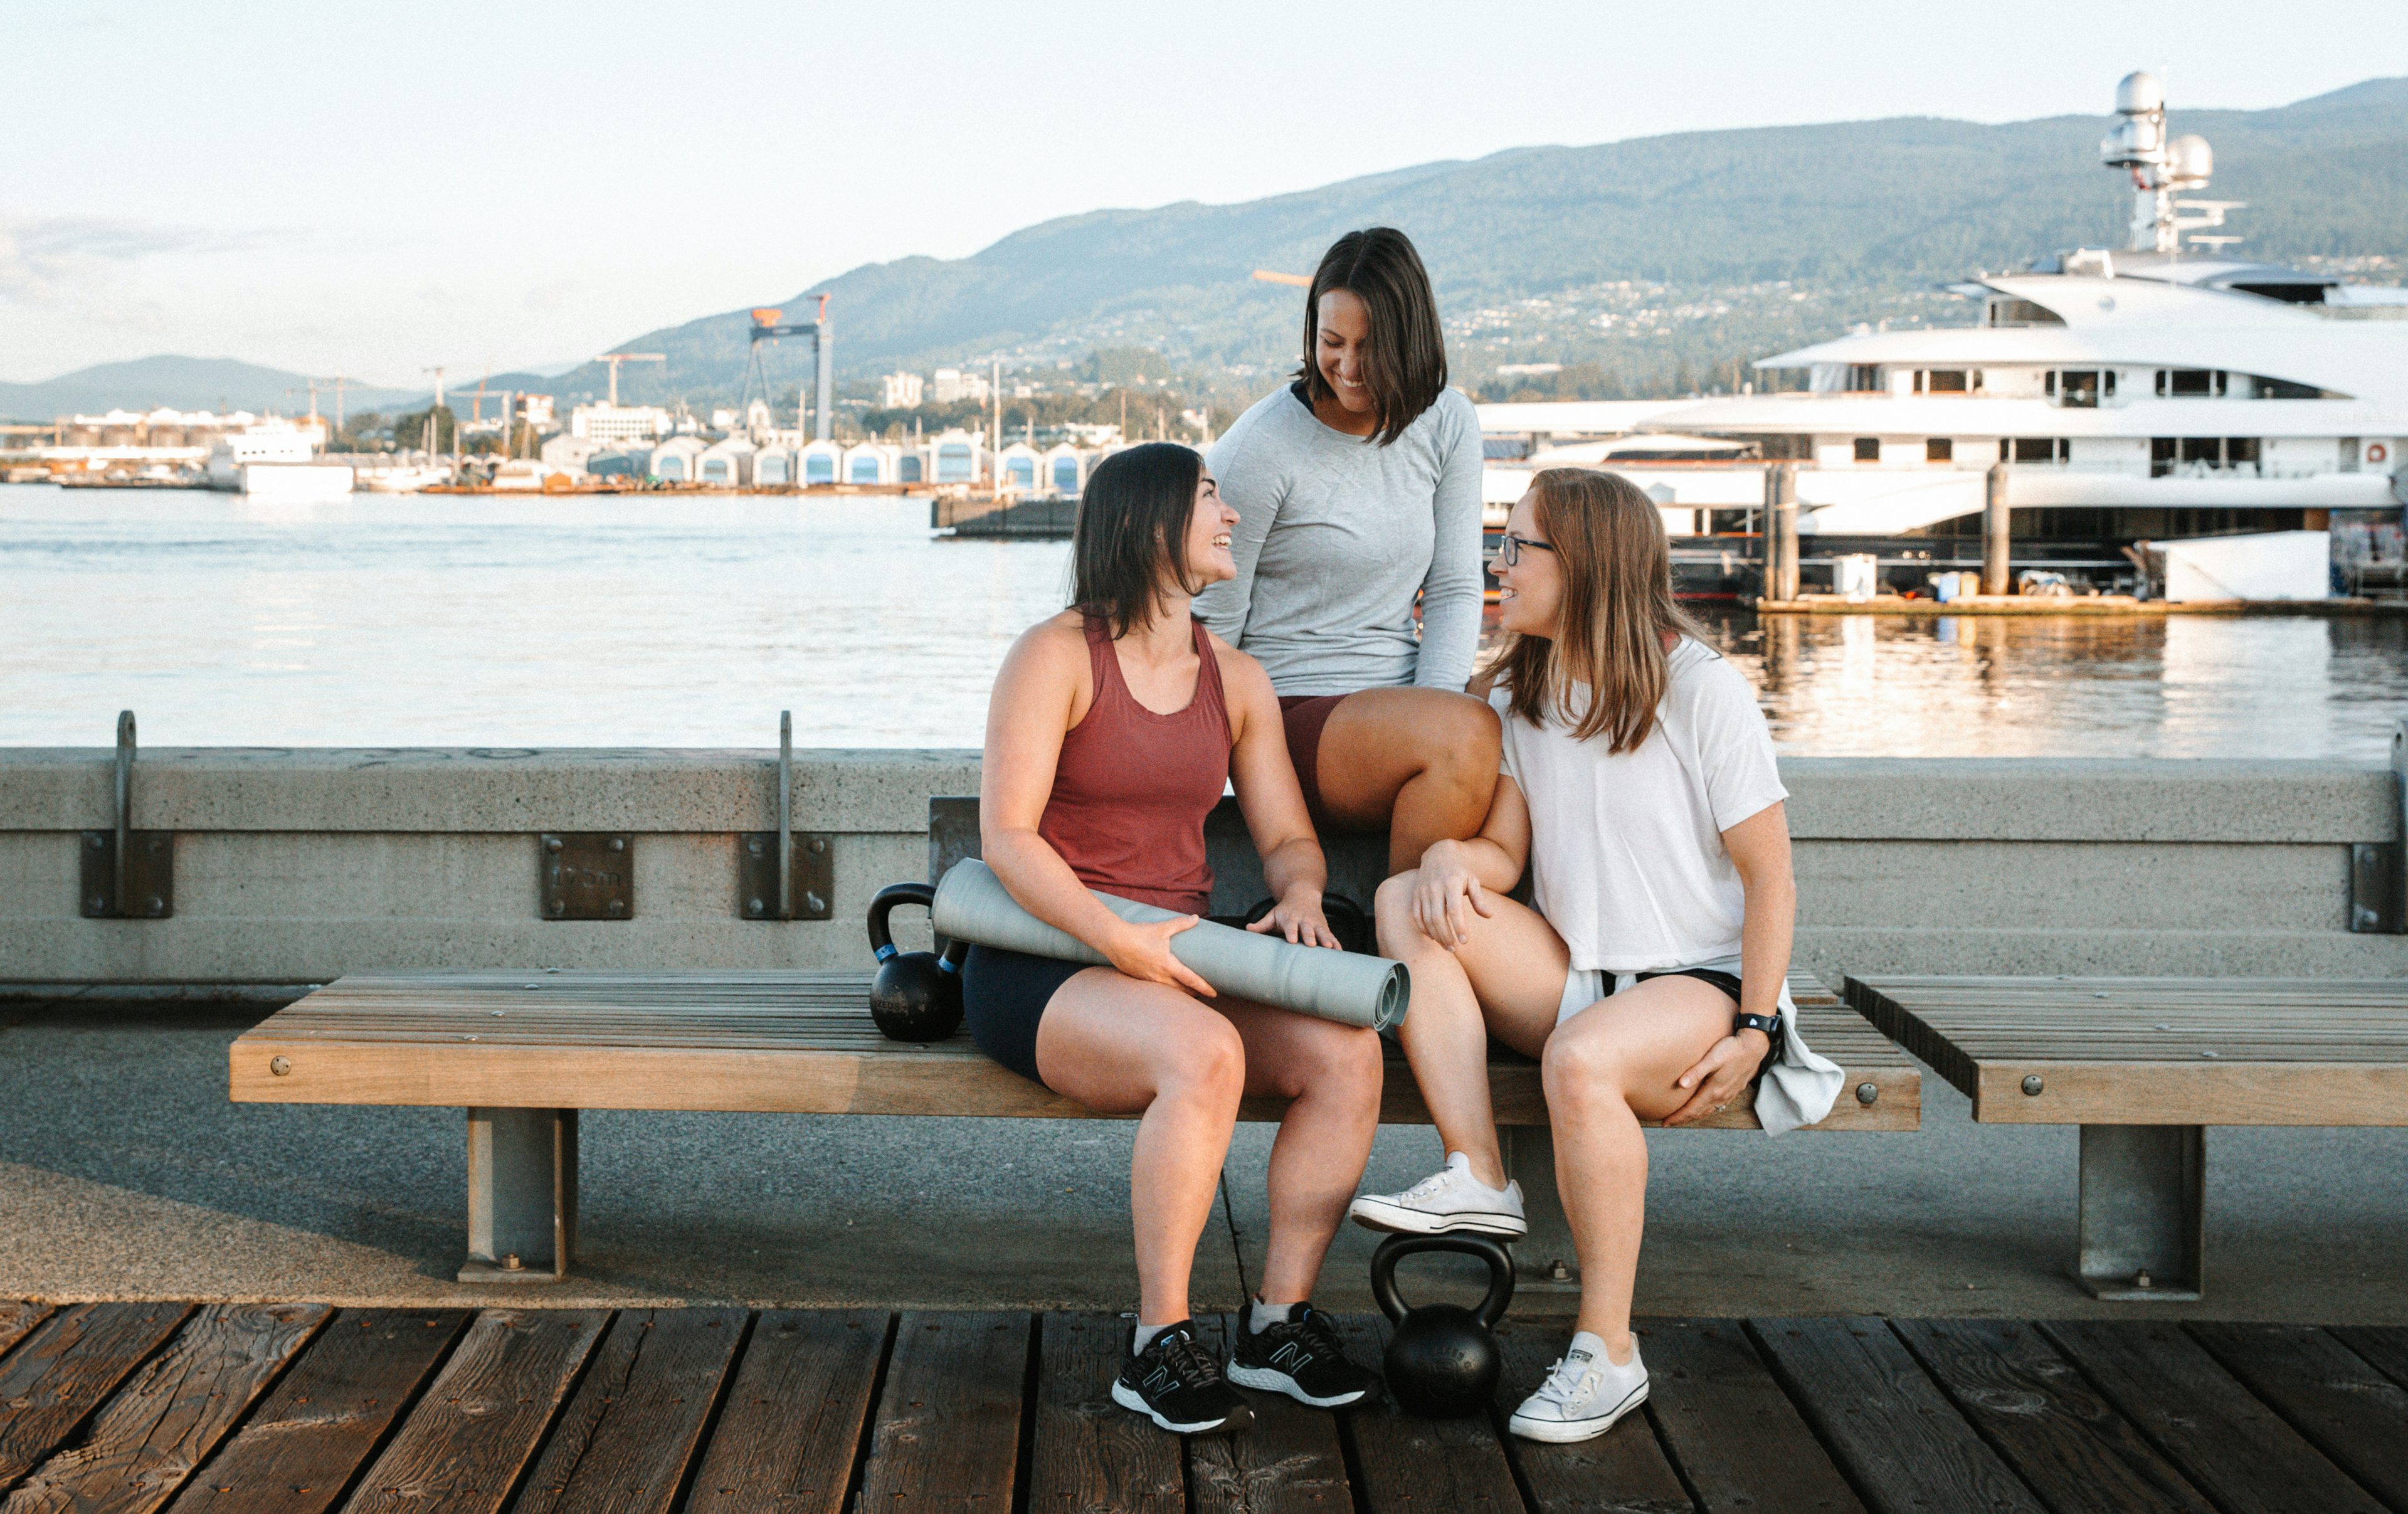 Briana, Jess, and Andrea sitting on a pier